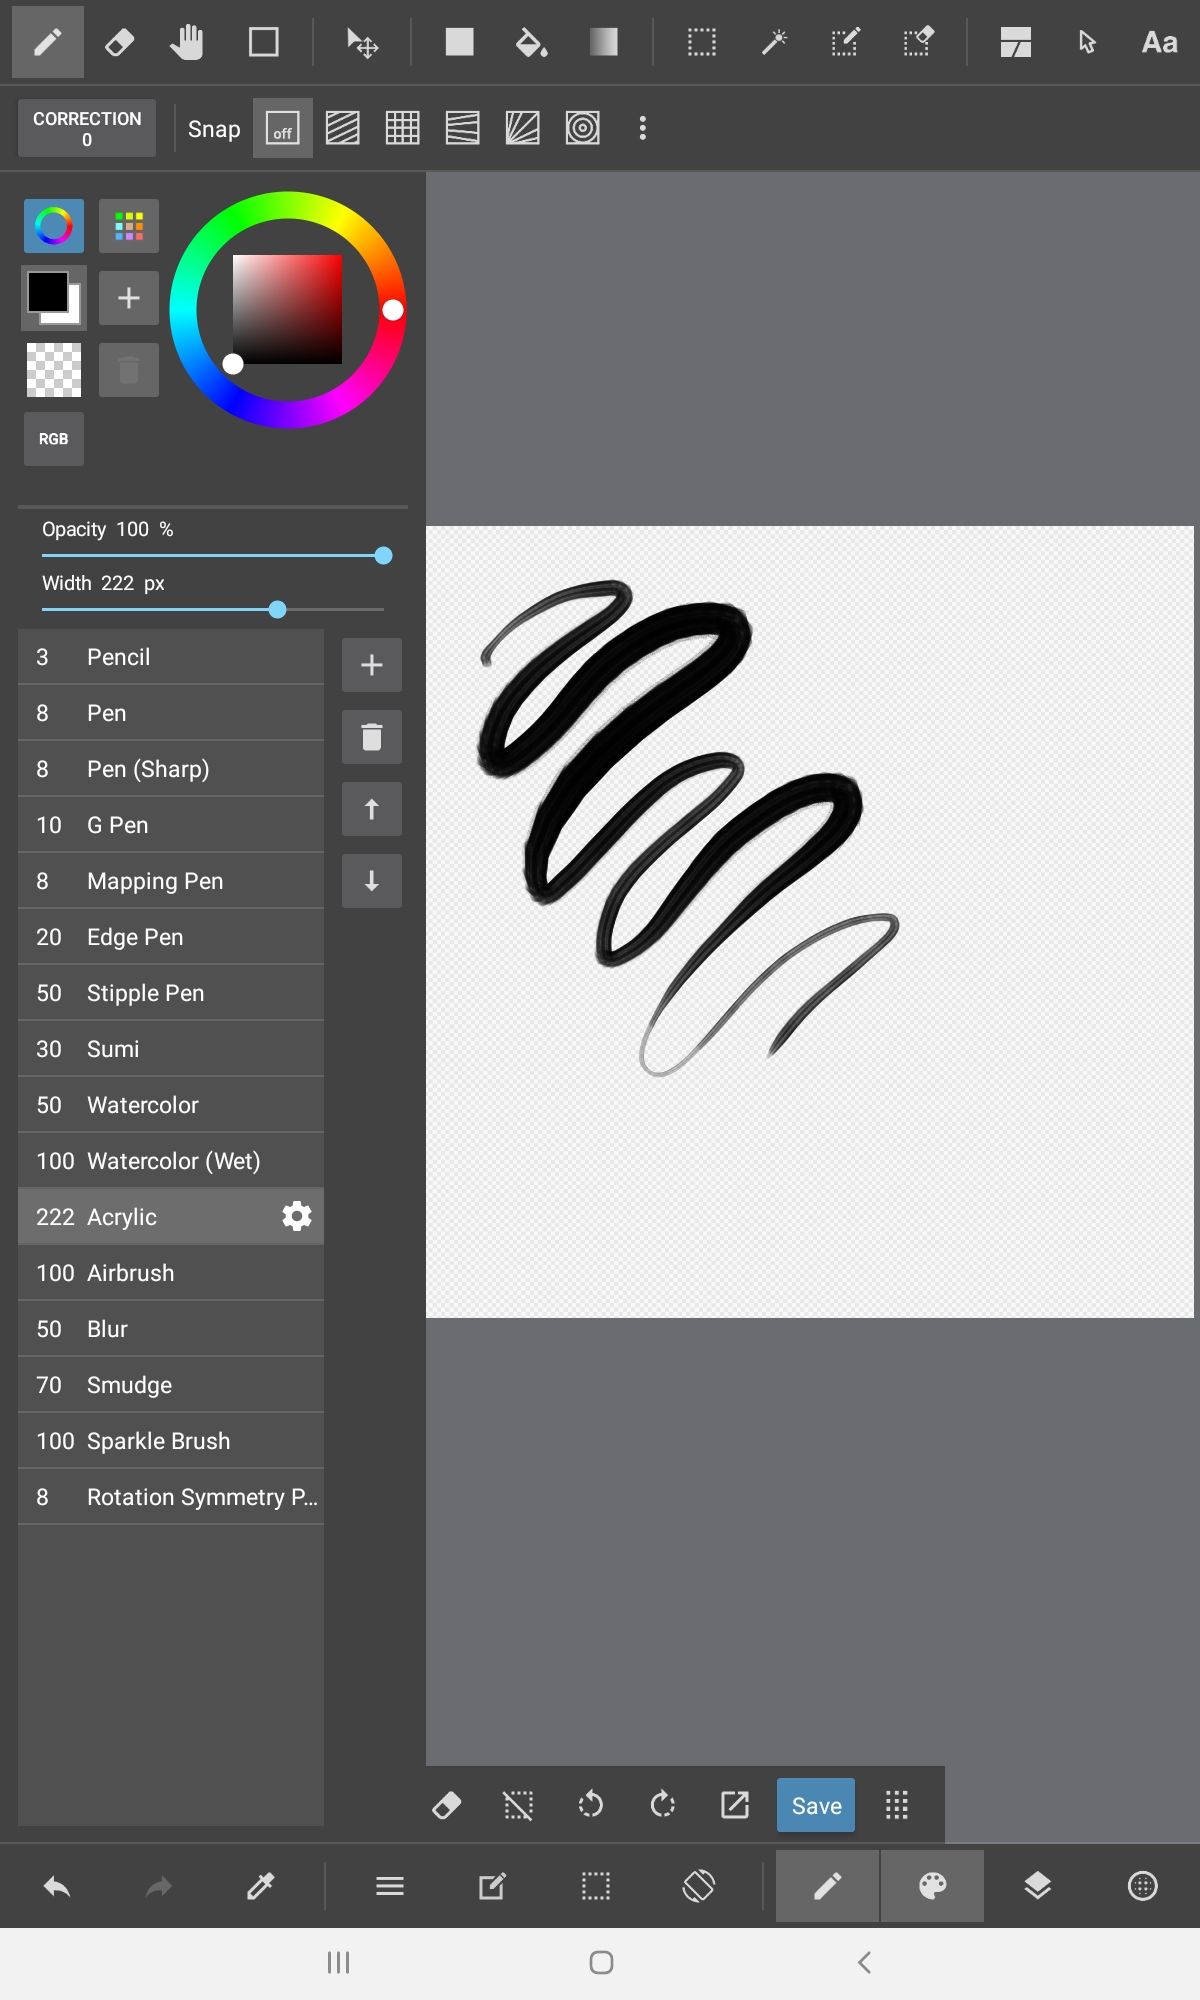 Various brush options for drawing and painting in the MediBang app on Android.